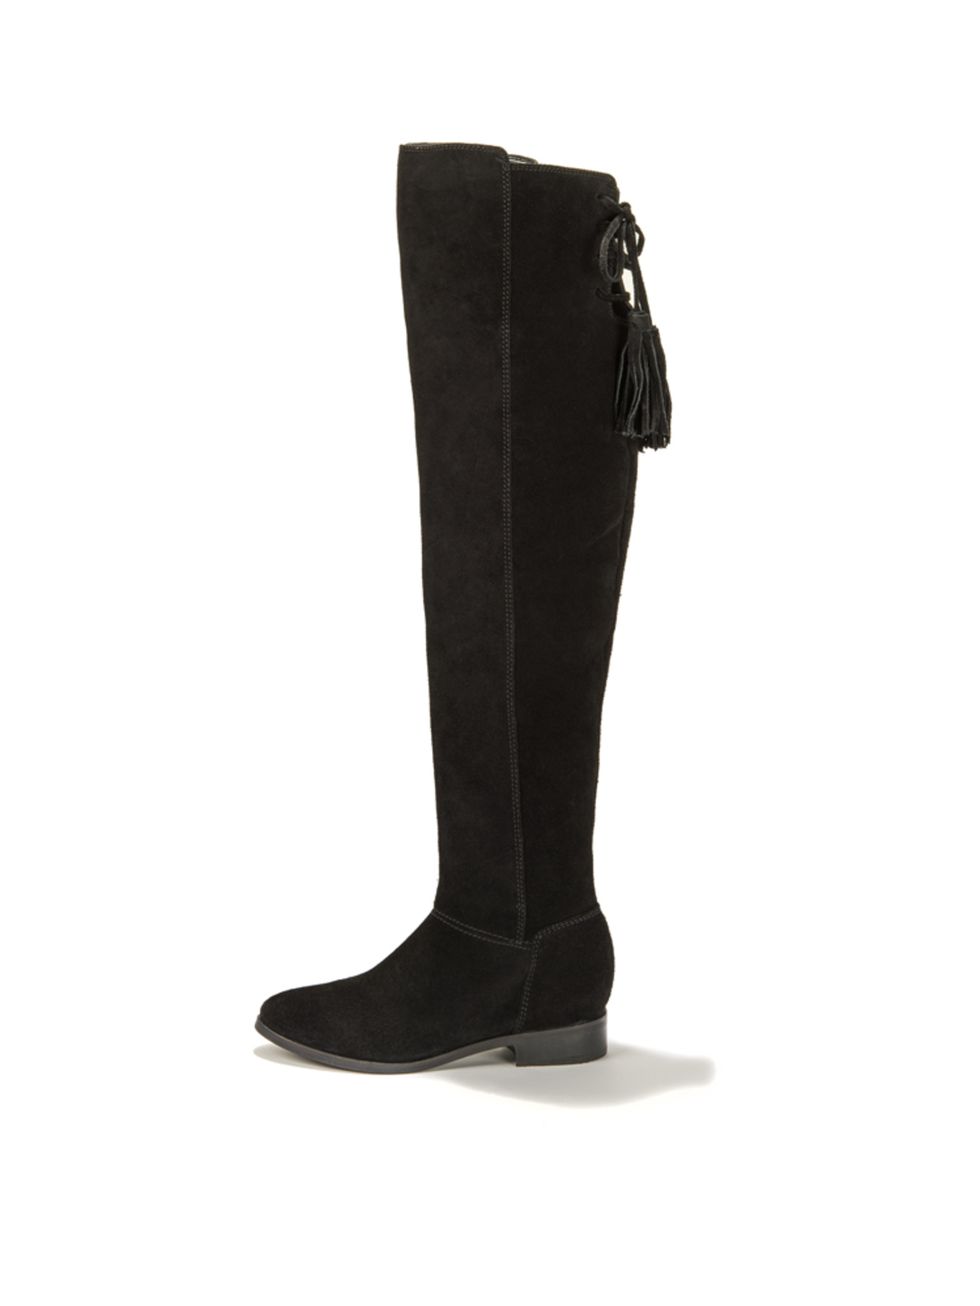 <p><a href="http://www.asos.com/ASOS/ASOS-KITCH-Suede-Over-The-Knee-Boots/Prod/pgeproduct.aspx?iid=5217771&cid=6455&Rf-400=53&sh=0&pge=0&pgesize=204&sort=-1&clr=Black&totalstyles=118&gridsize=4" target="_blank">Asos Suede Over The Knee Boots</a></p>

<p>£